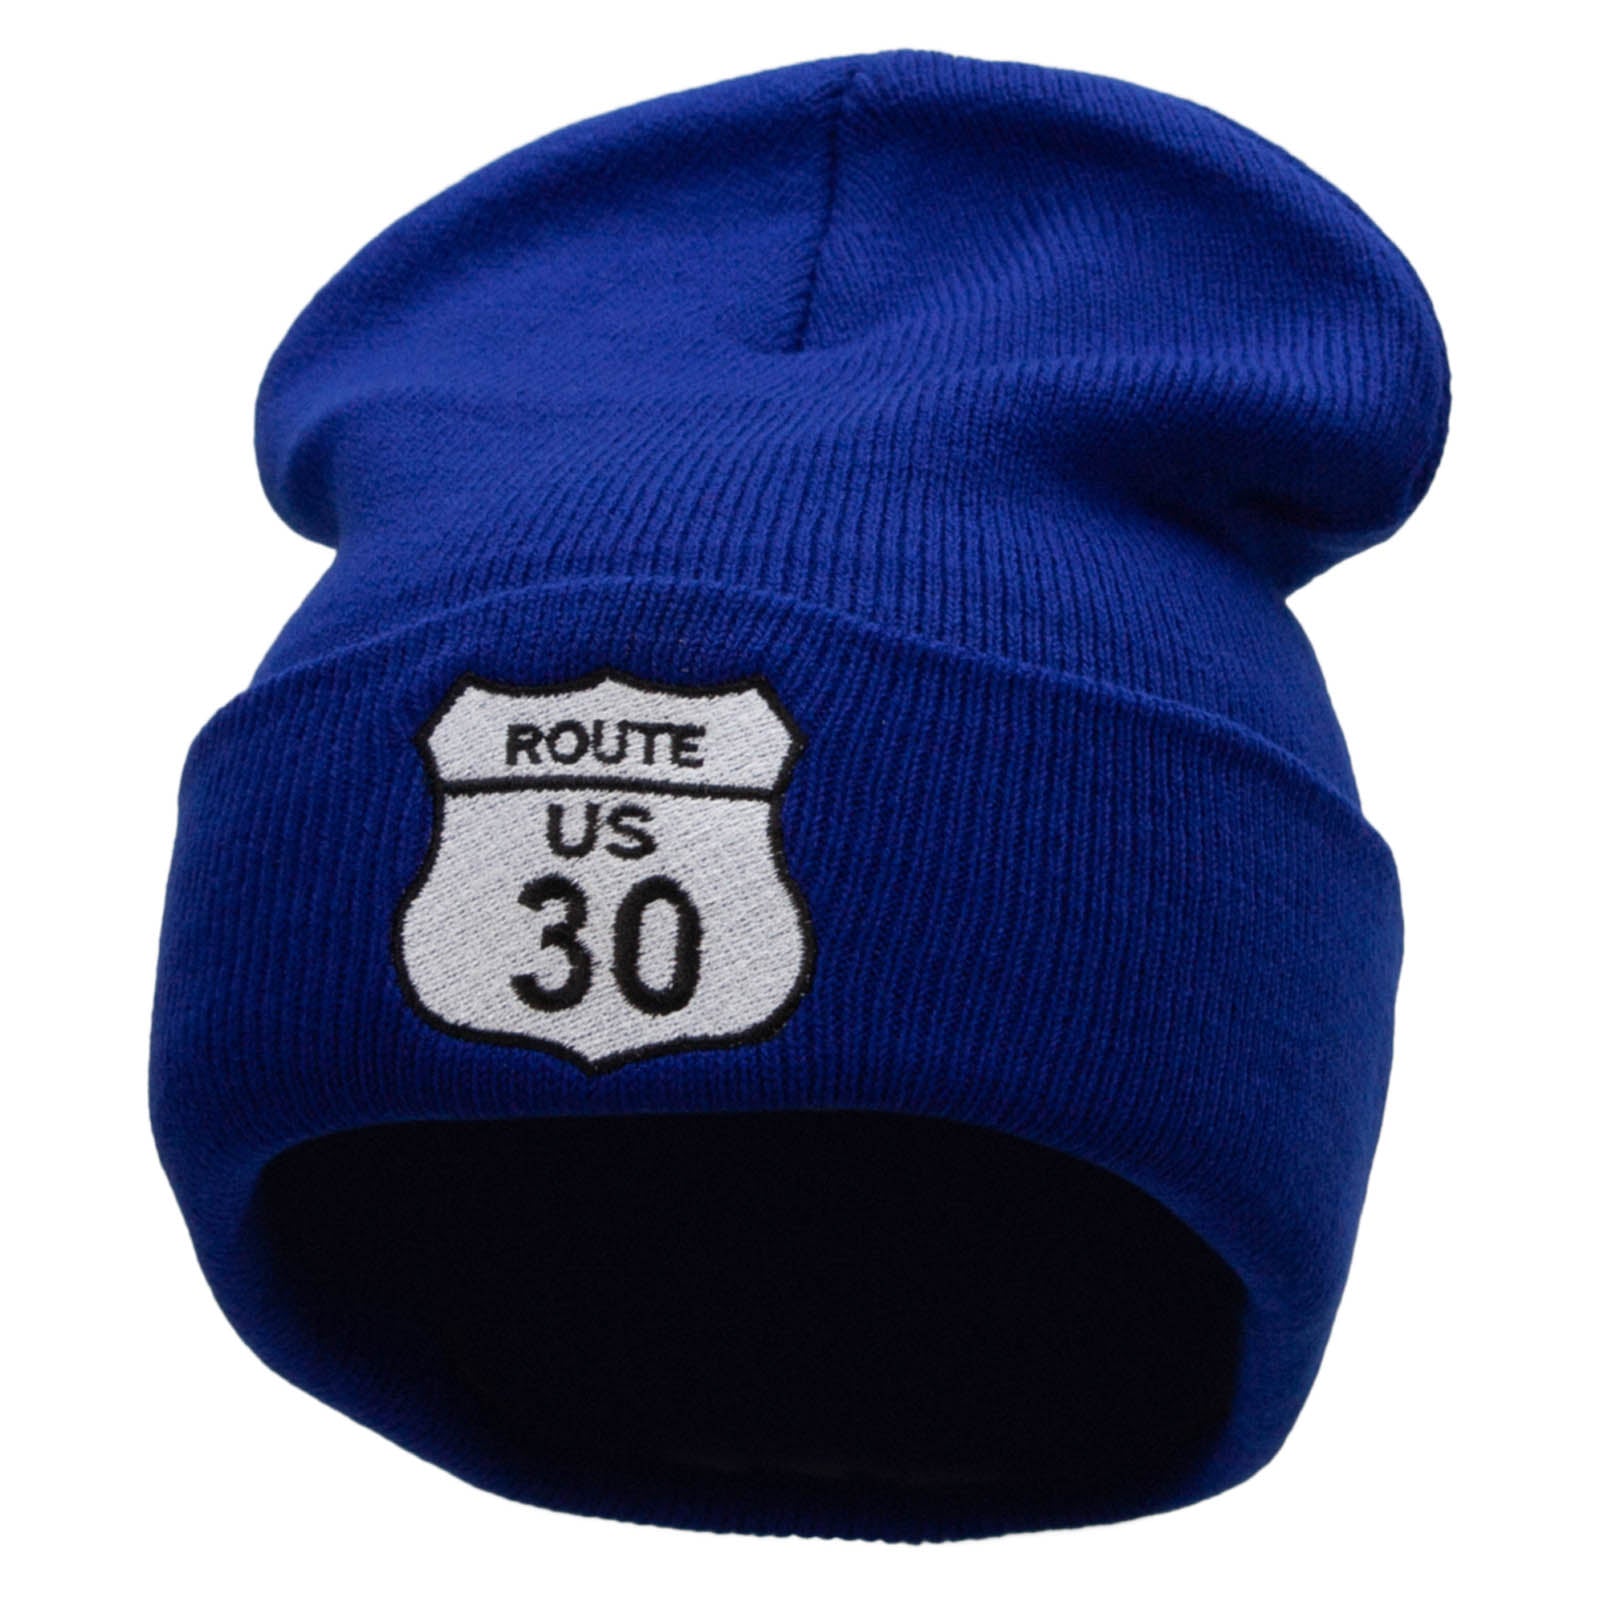 Route US 30 Embroidered 12 Inch Long Knitted Beanie - Royal OSFM